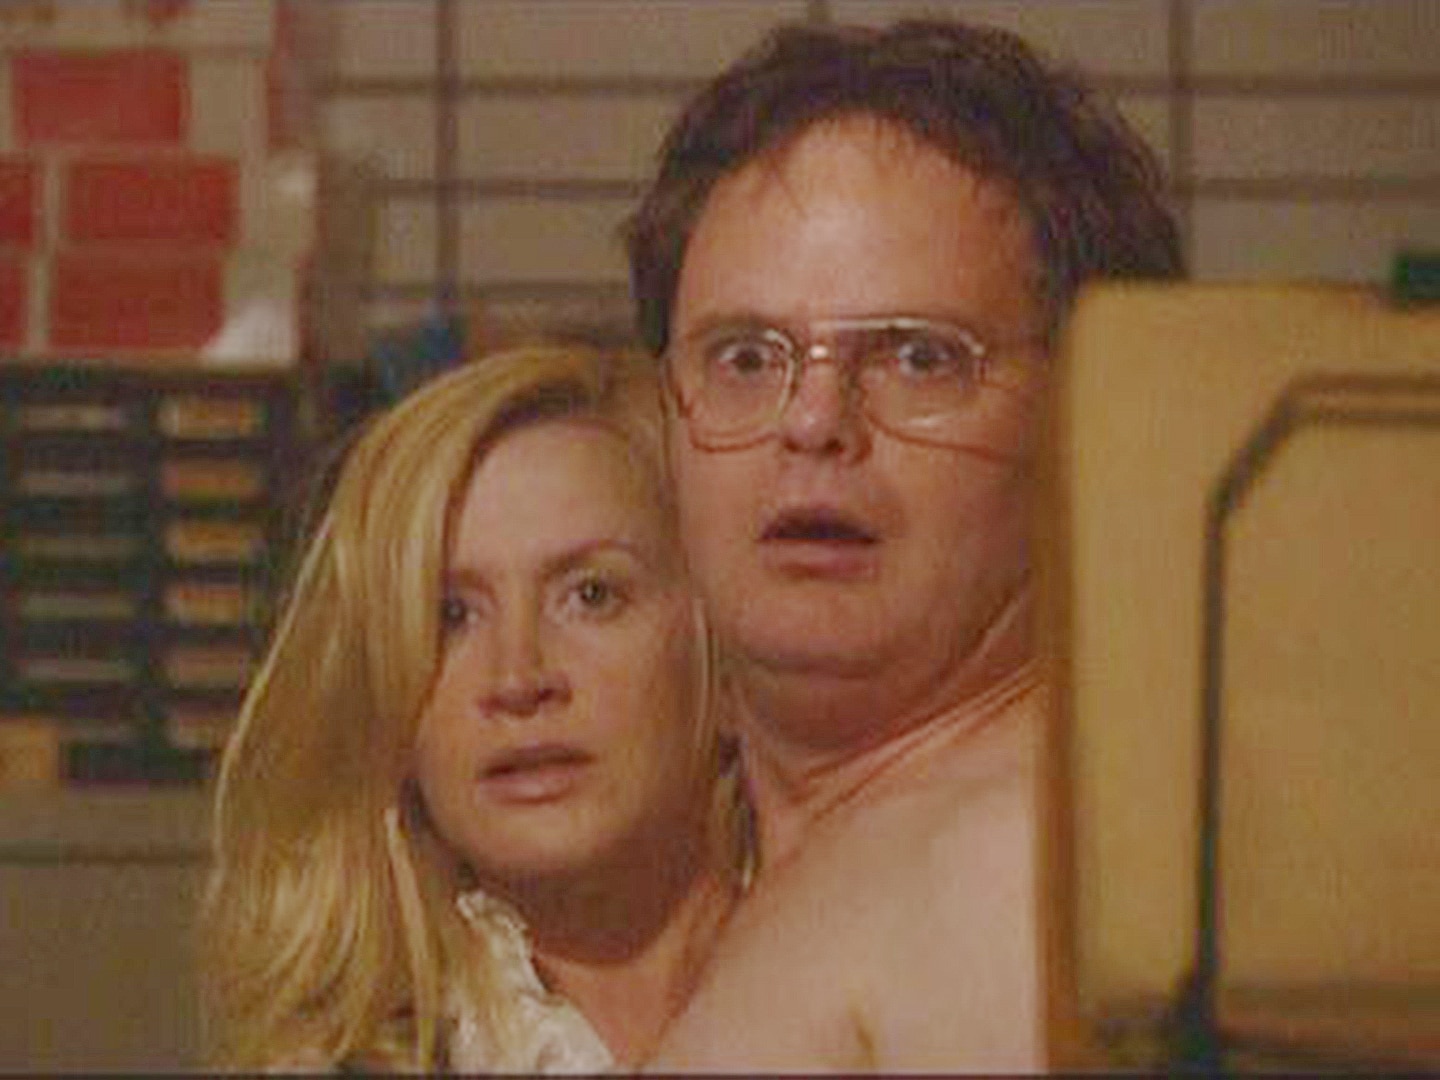 The Office: Dwight and Angela Moments Photo: 603551 